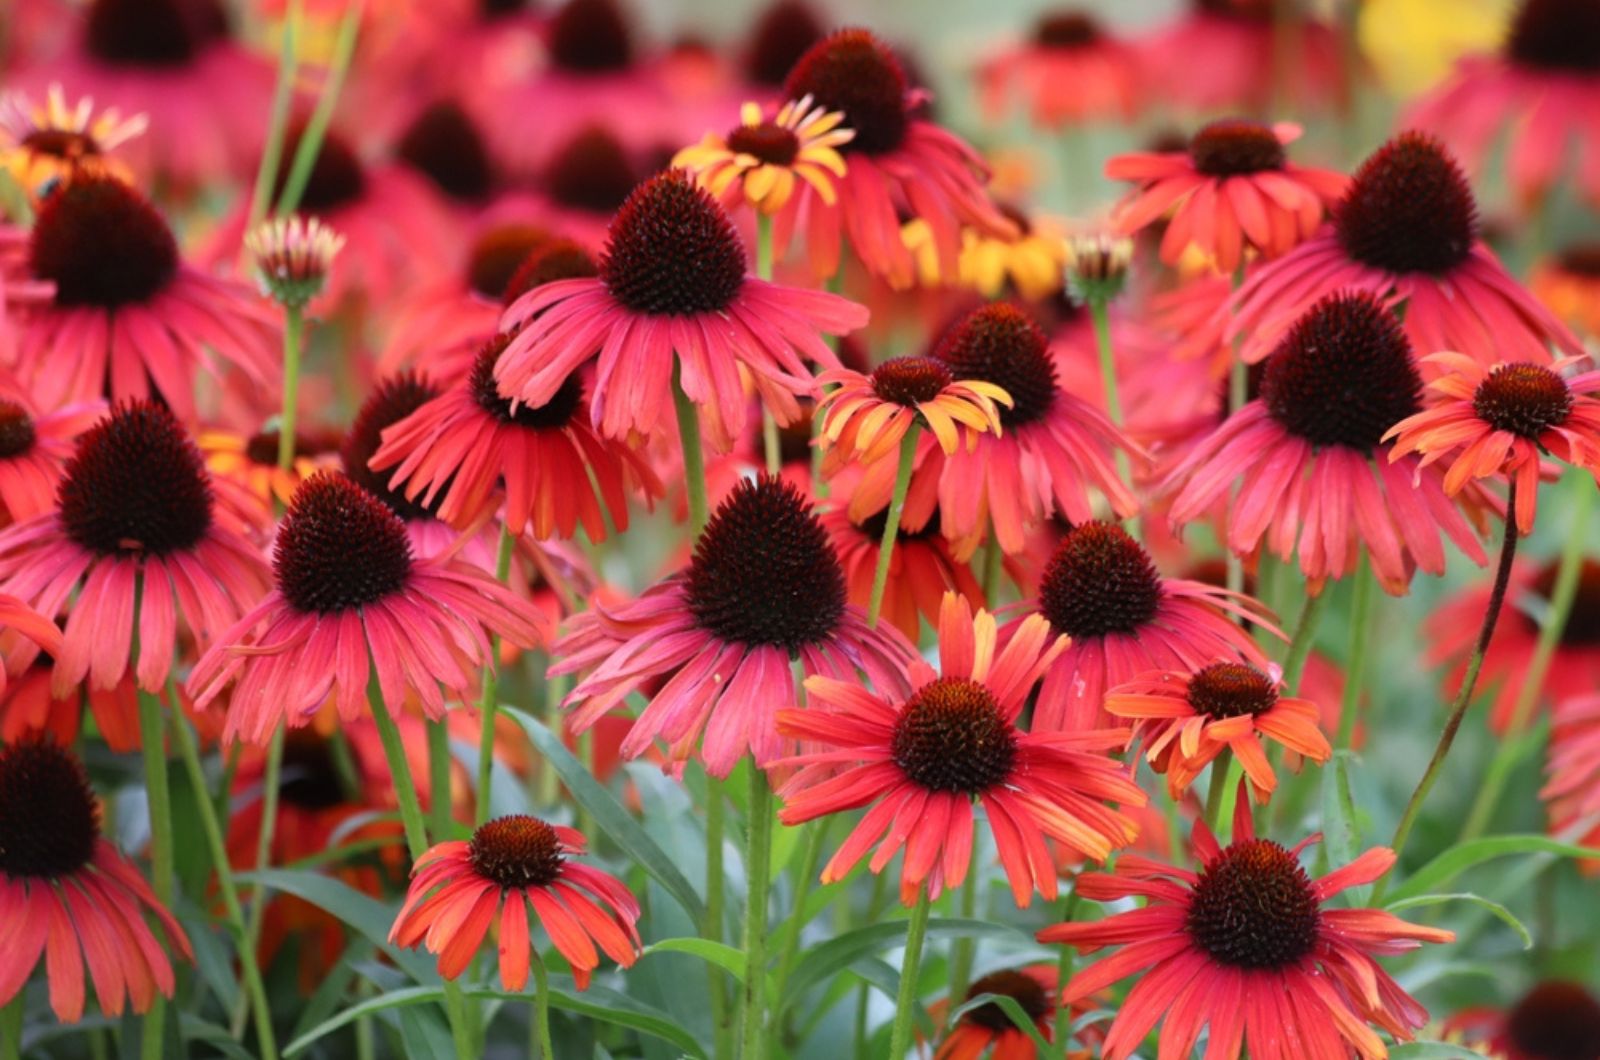 Flower plant commonly known as coneflower.